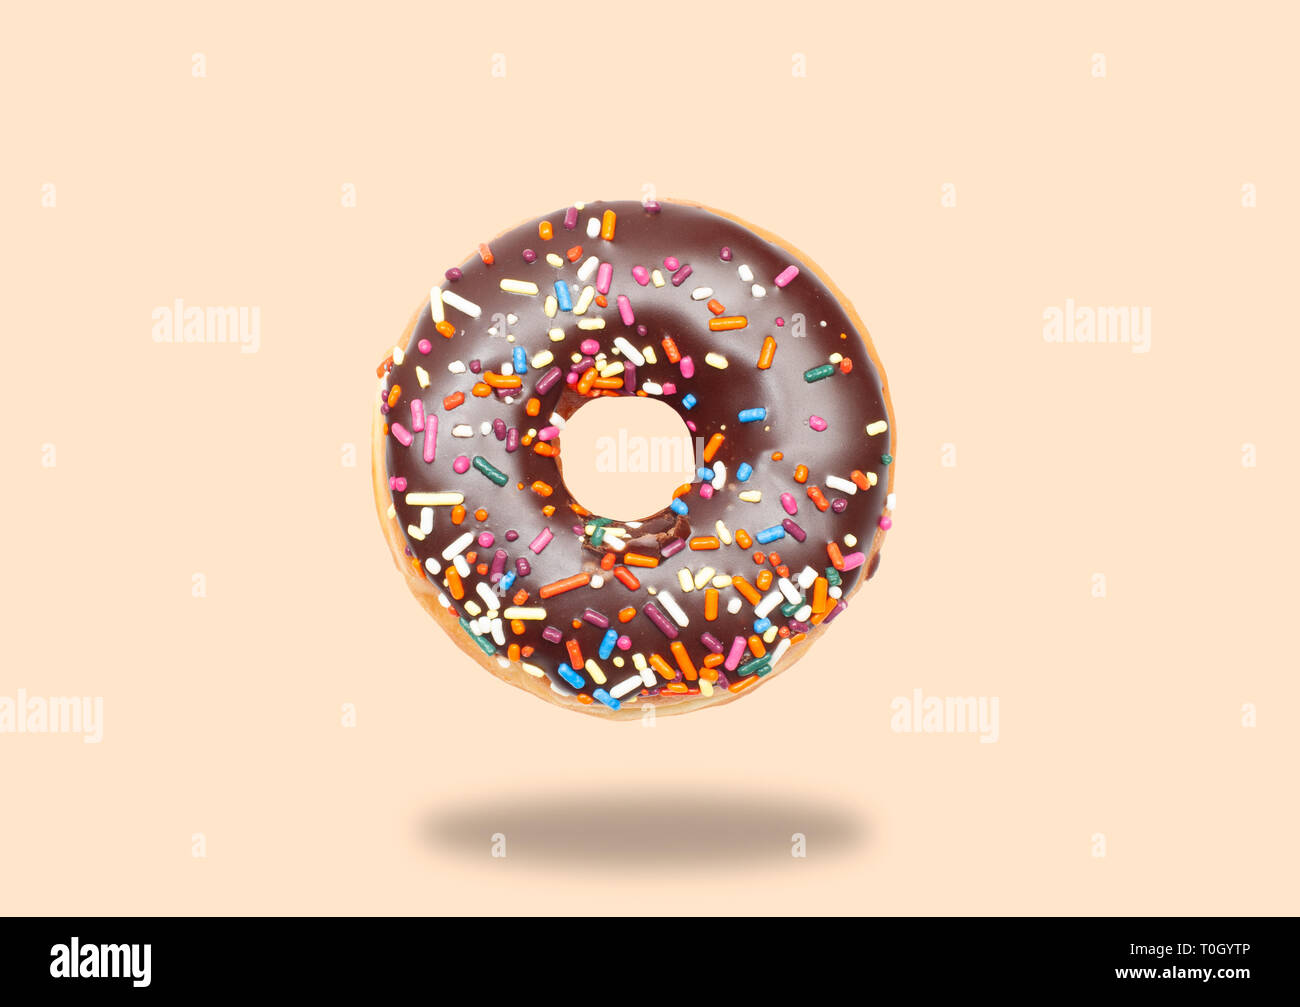 Chocolate donut with icing on pastel background. Stock Photo